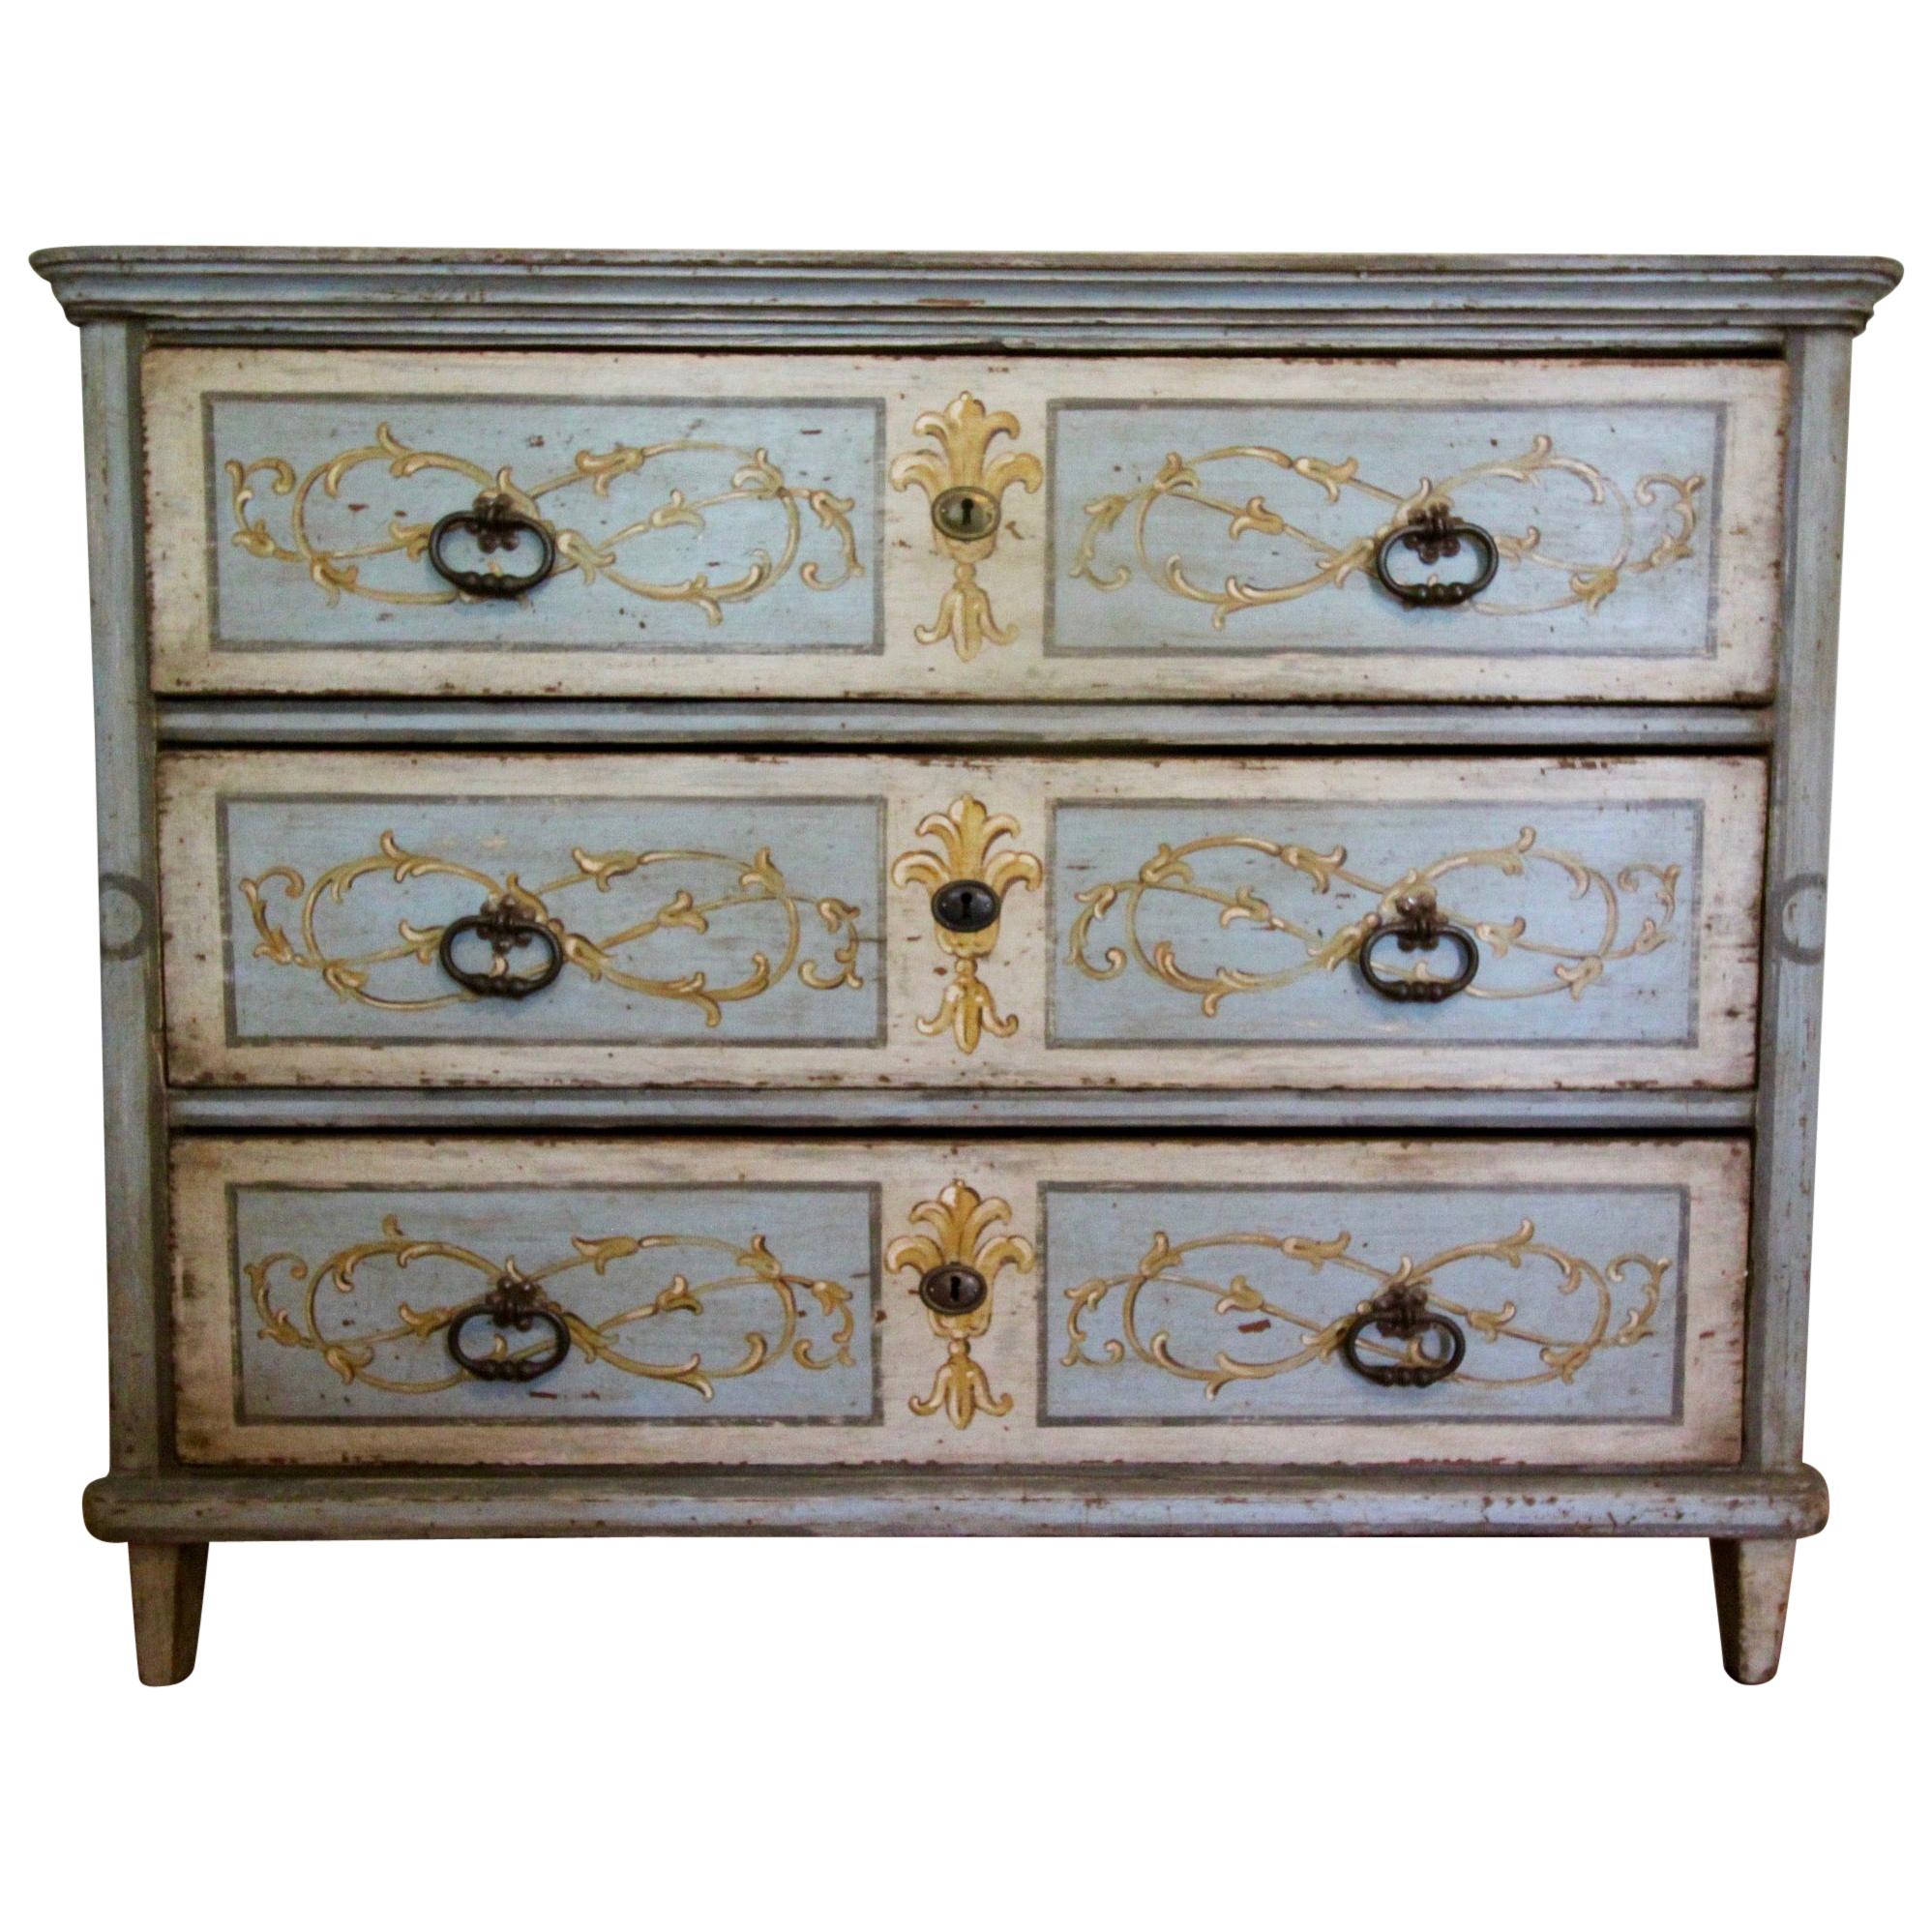 Early 19th Century Italian Commode or Chest of Drawers For Sale